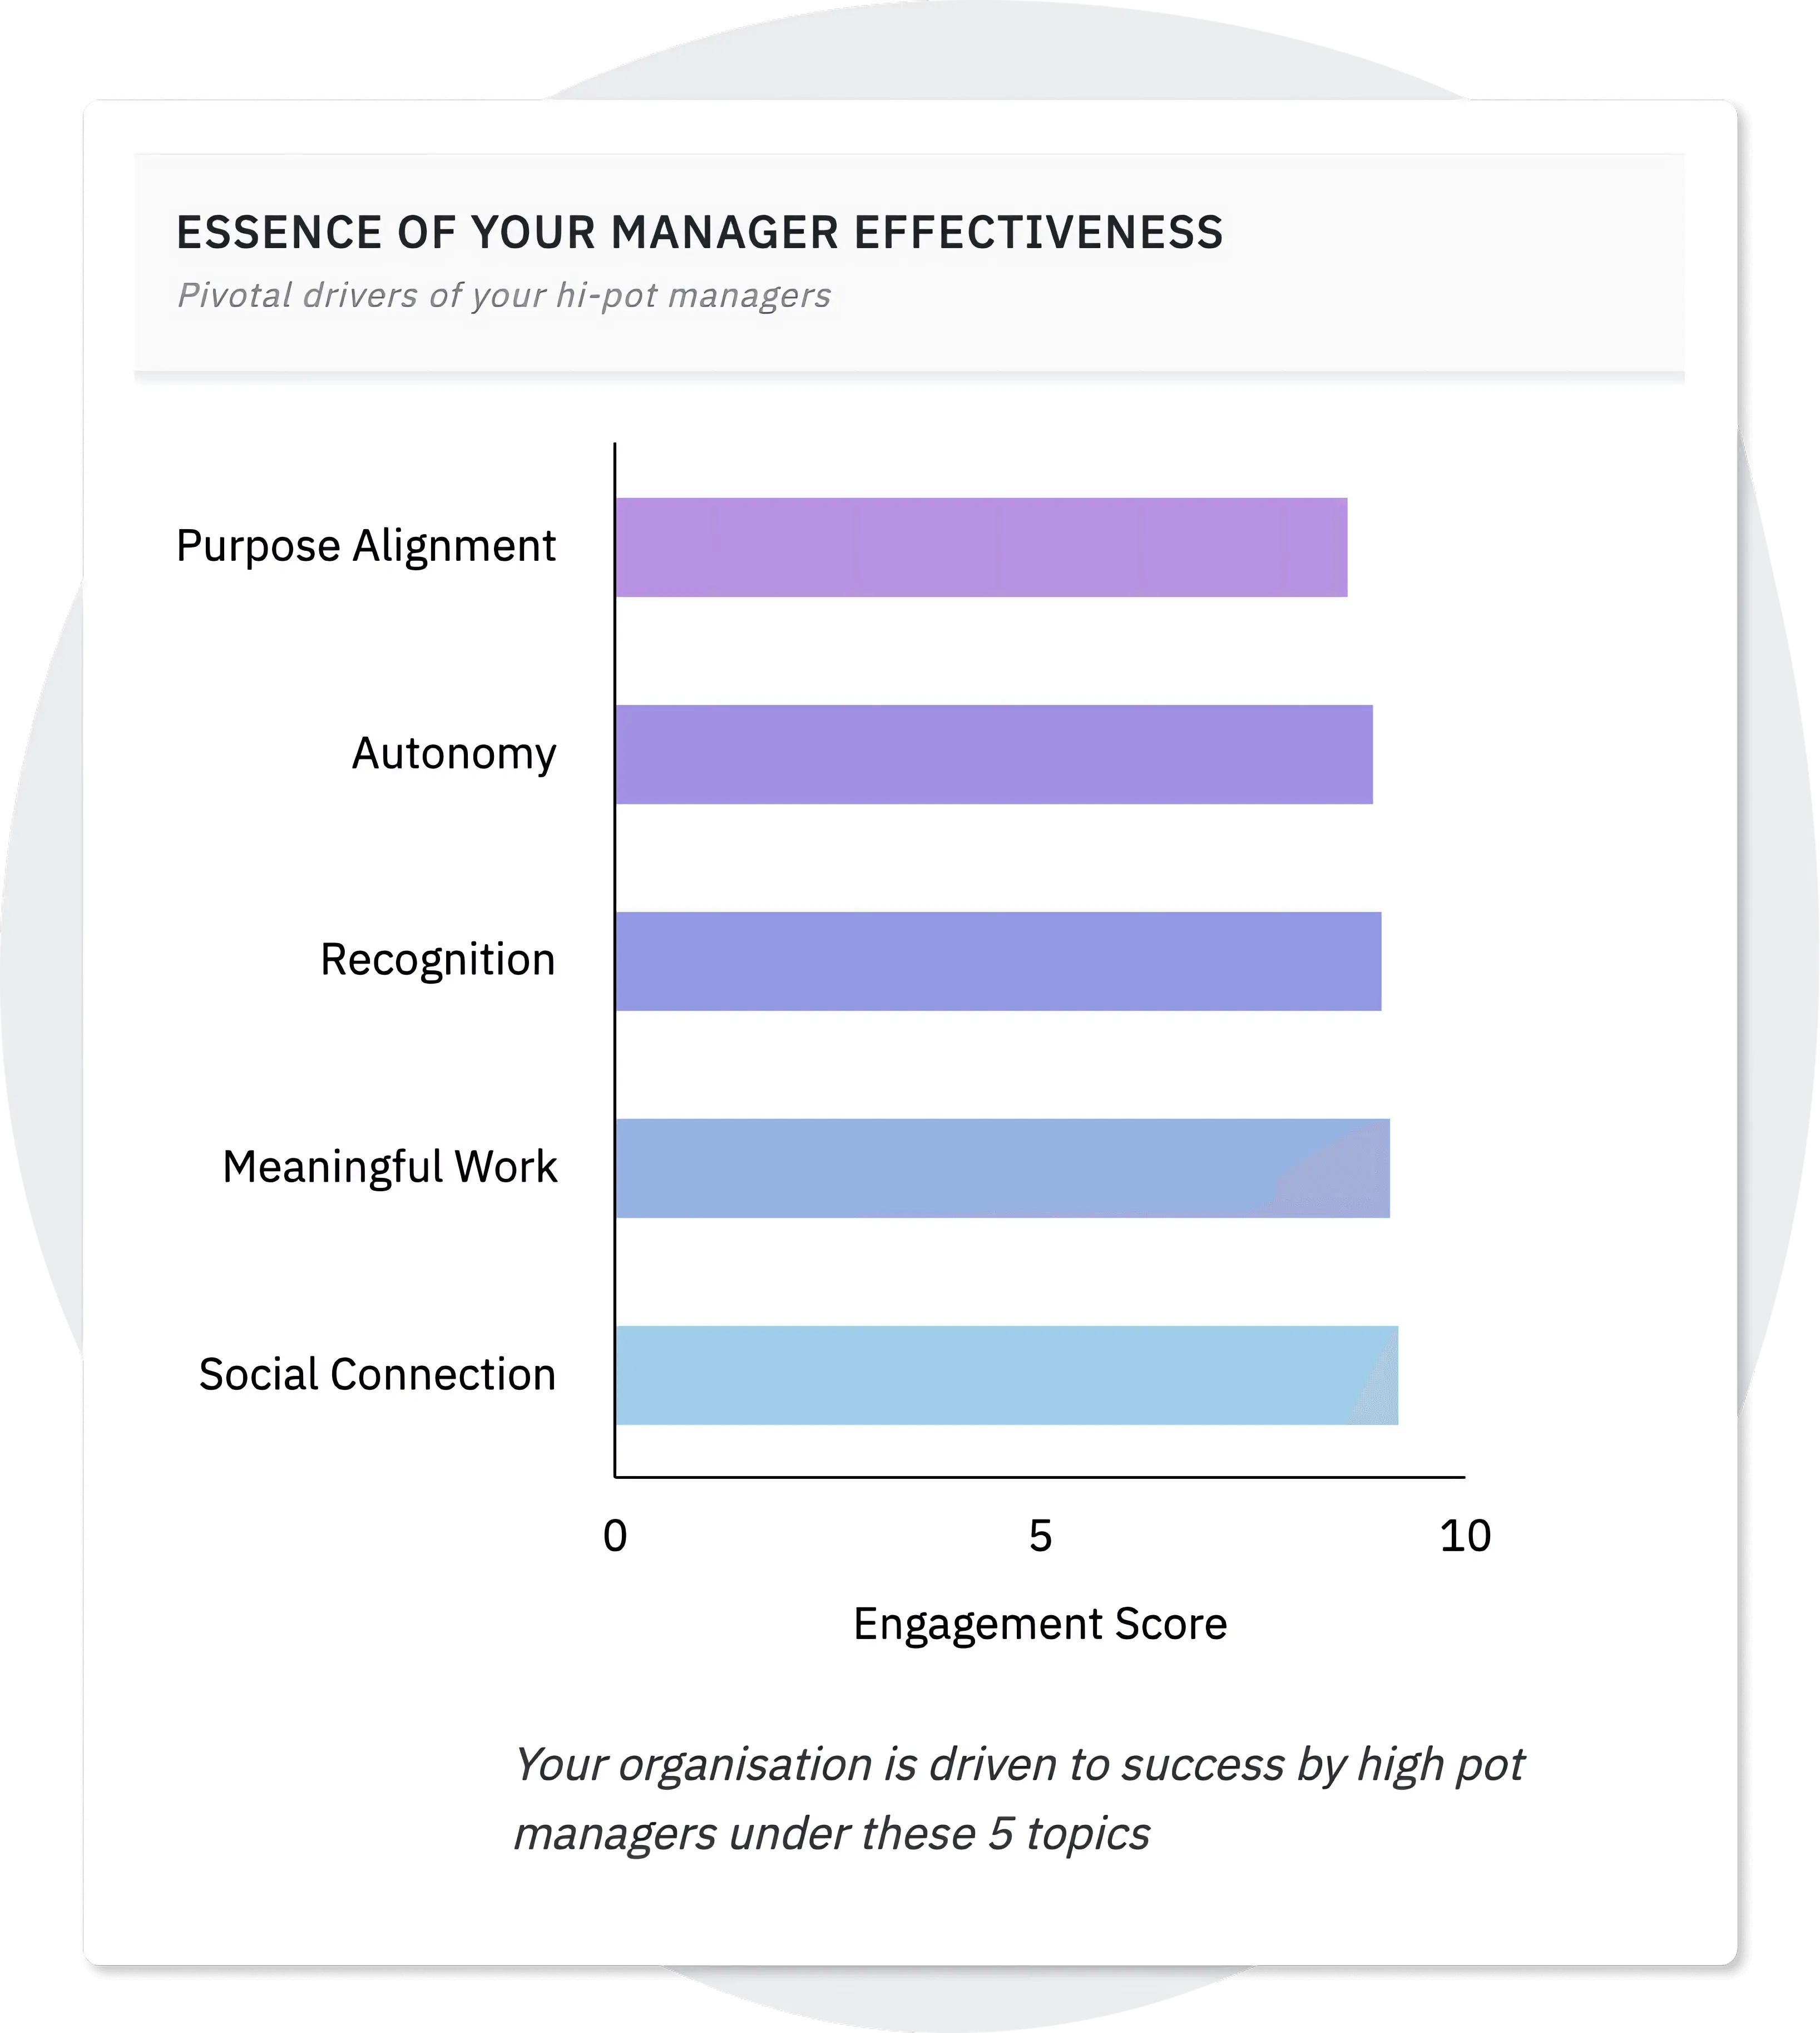 Put your managers the forefront of your employee engagement strategy